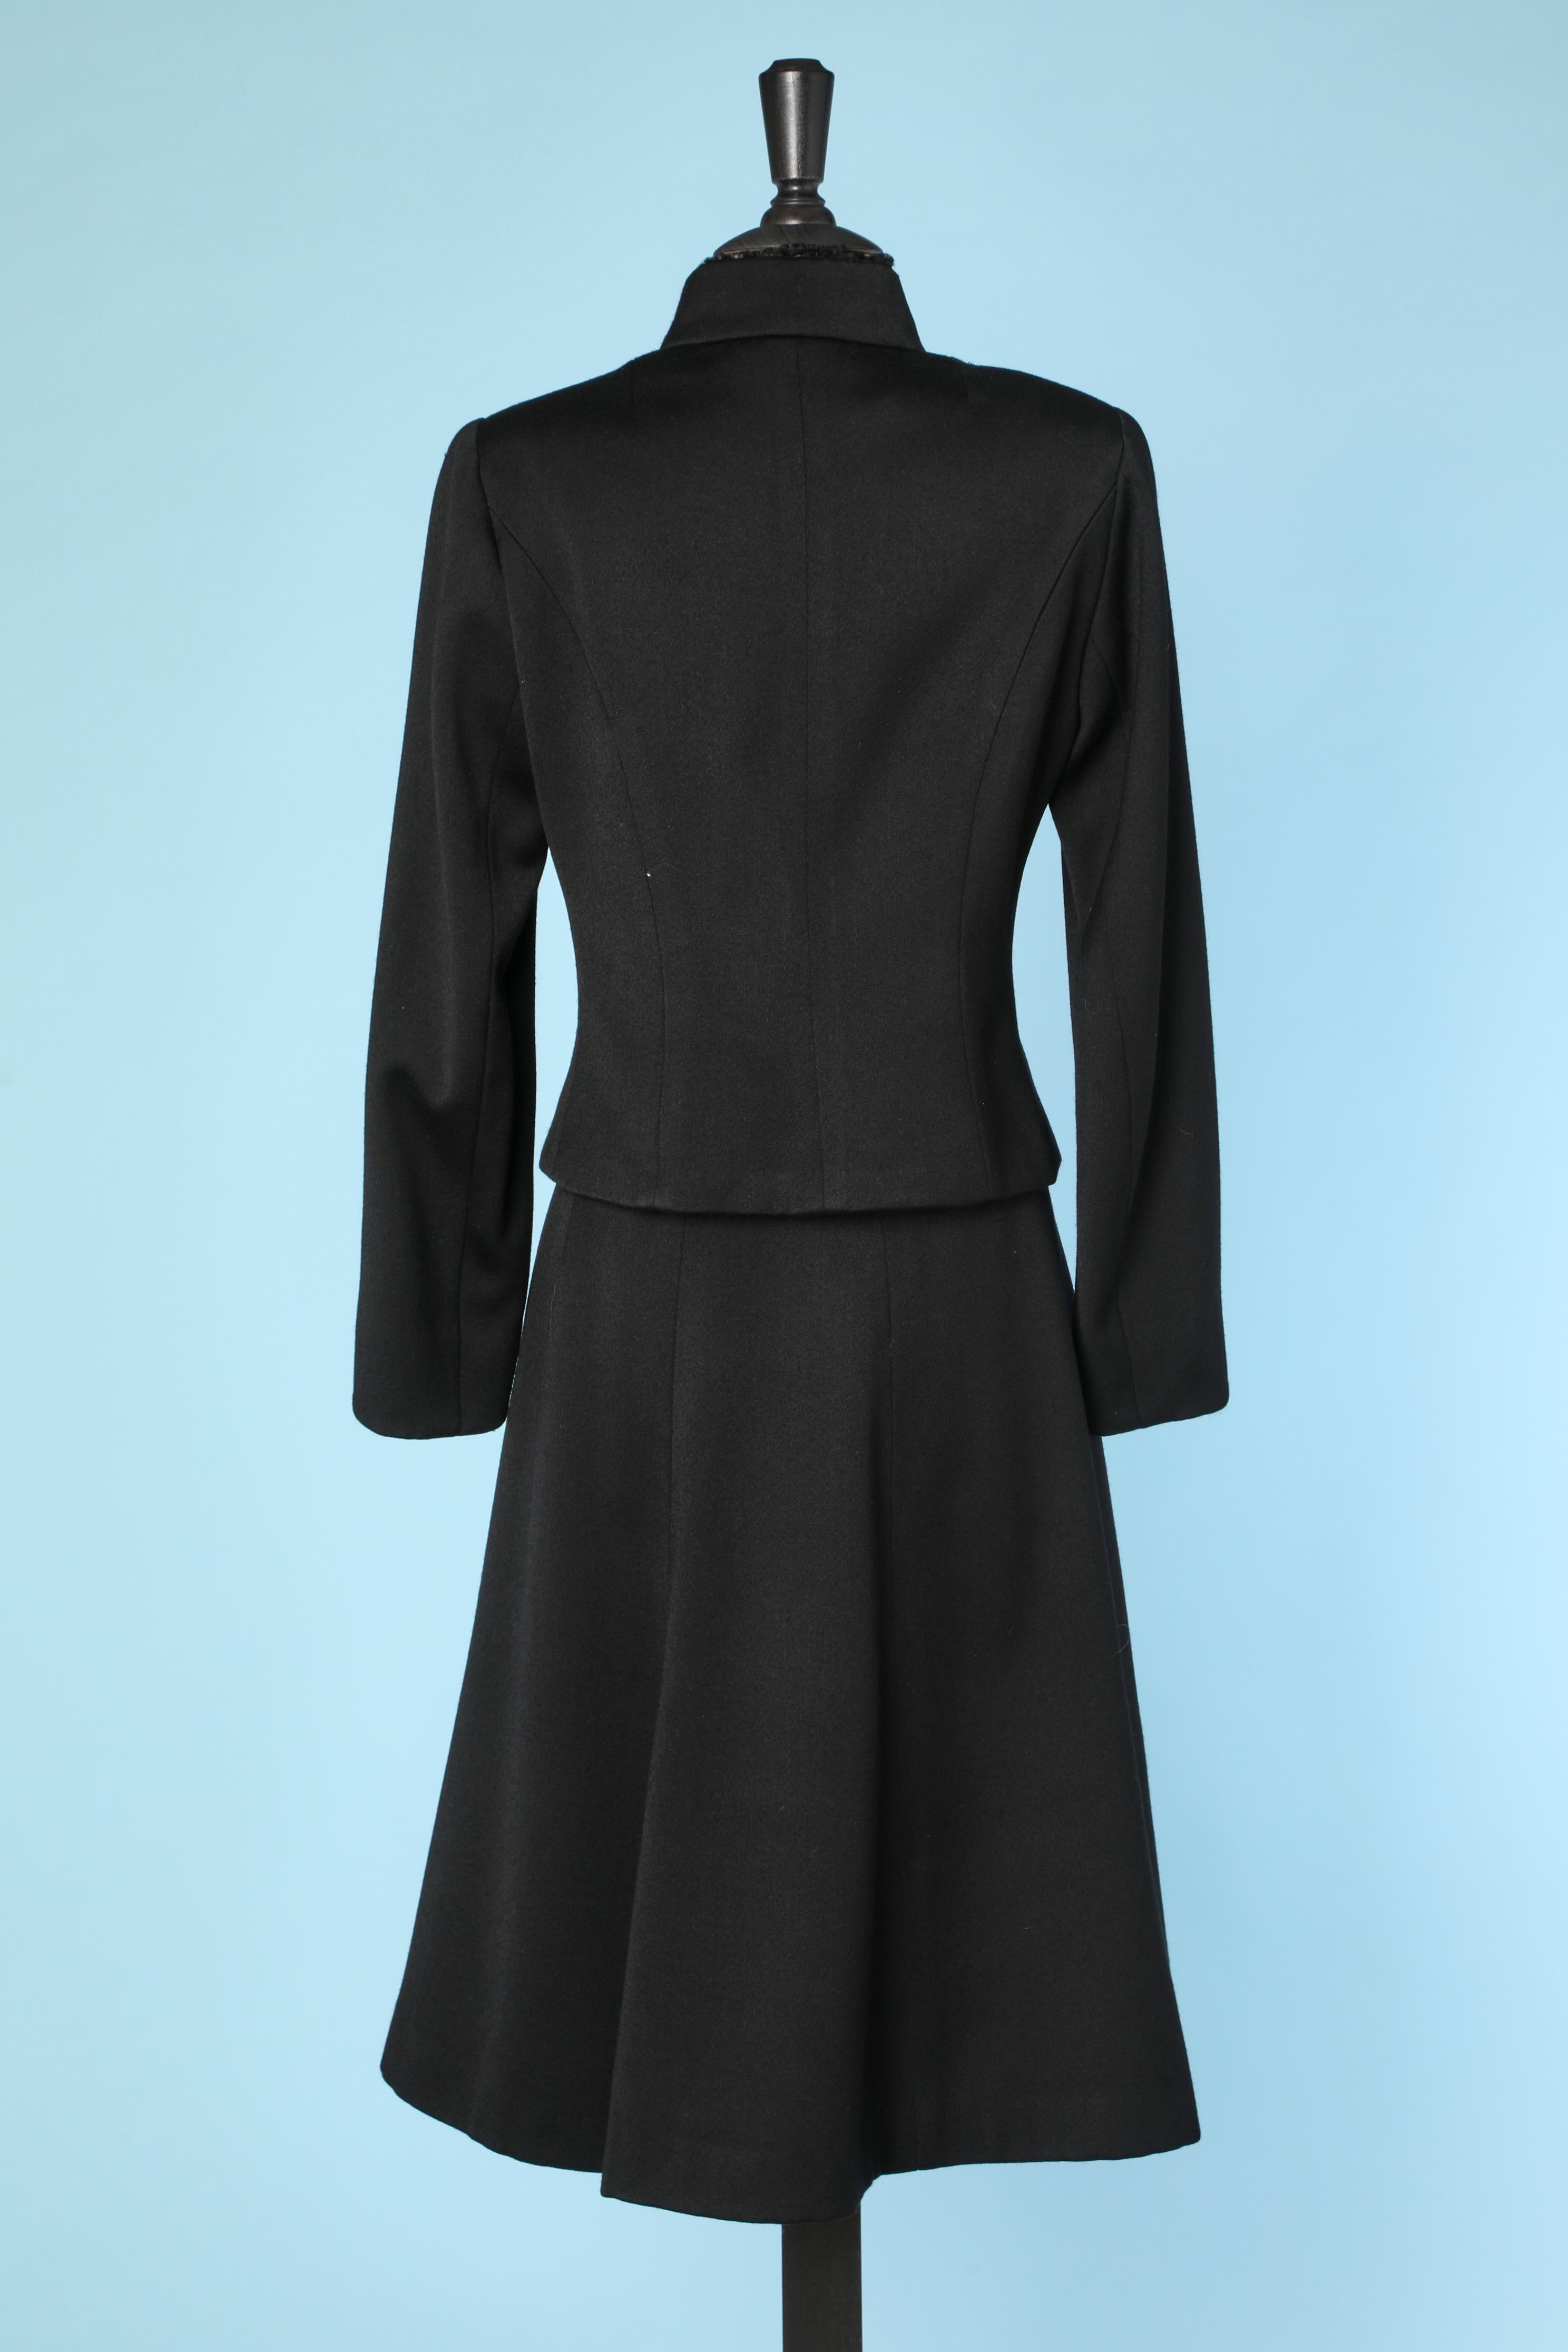 Black skirt-suit in wool, cachemire and astrakan collar Chloé For Sale 1